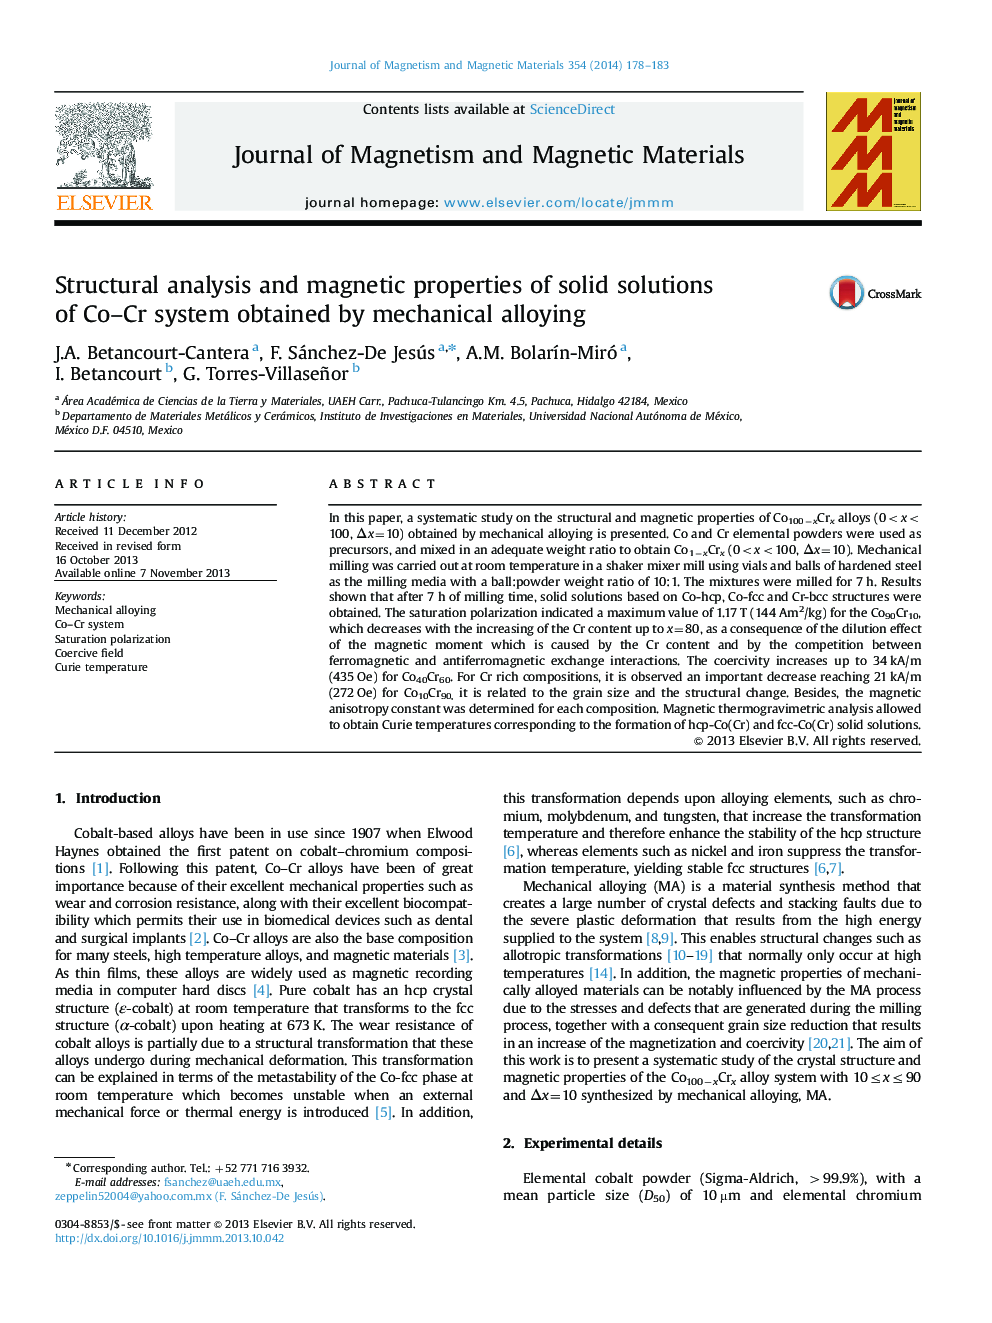 Structural analysis and magnetic properties of solid solutions of Co–Cr system obtained by mechanical alloying